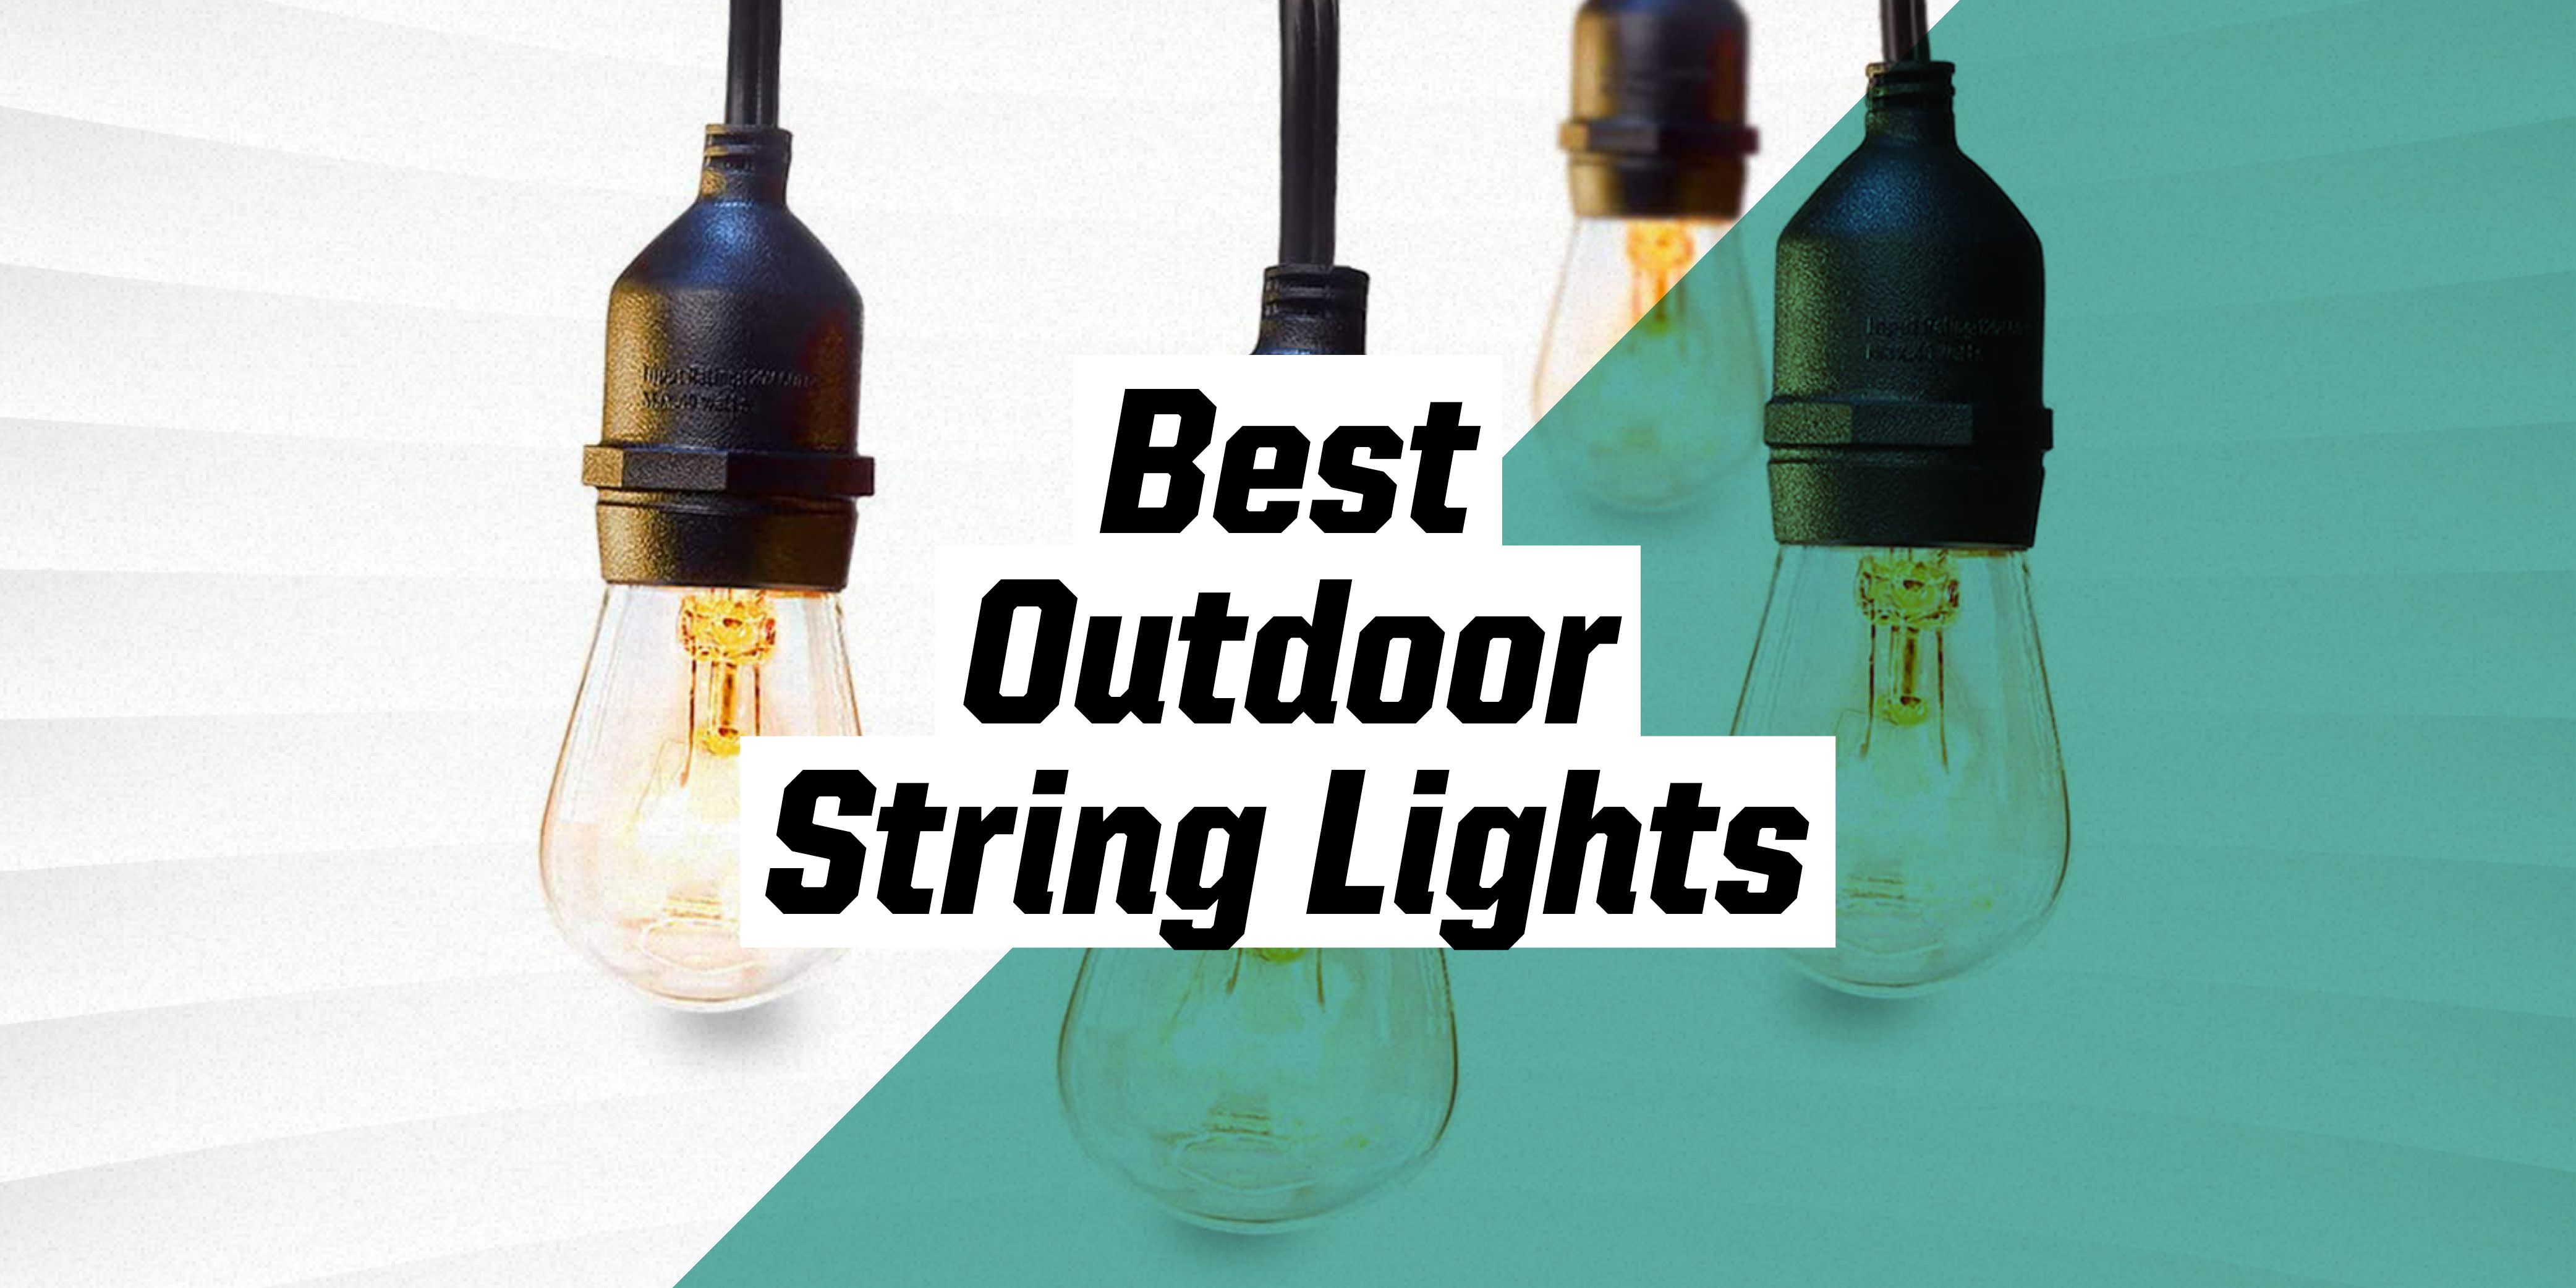 The 10 Best Outdoor String Lights 2021, Best Outdoor Patio Led String Lights